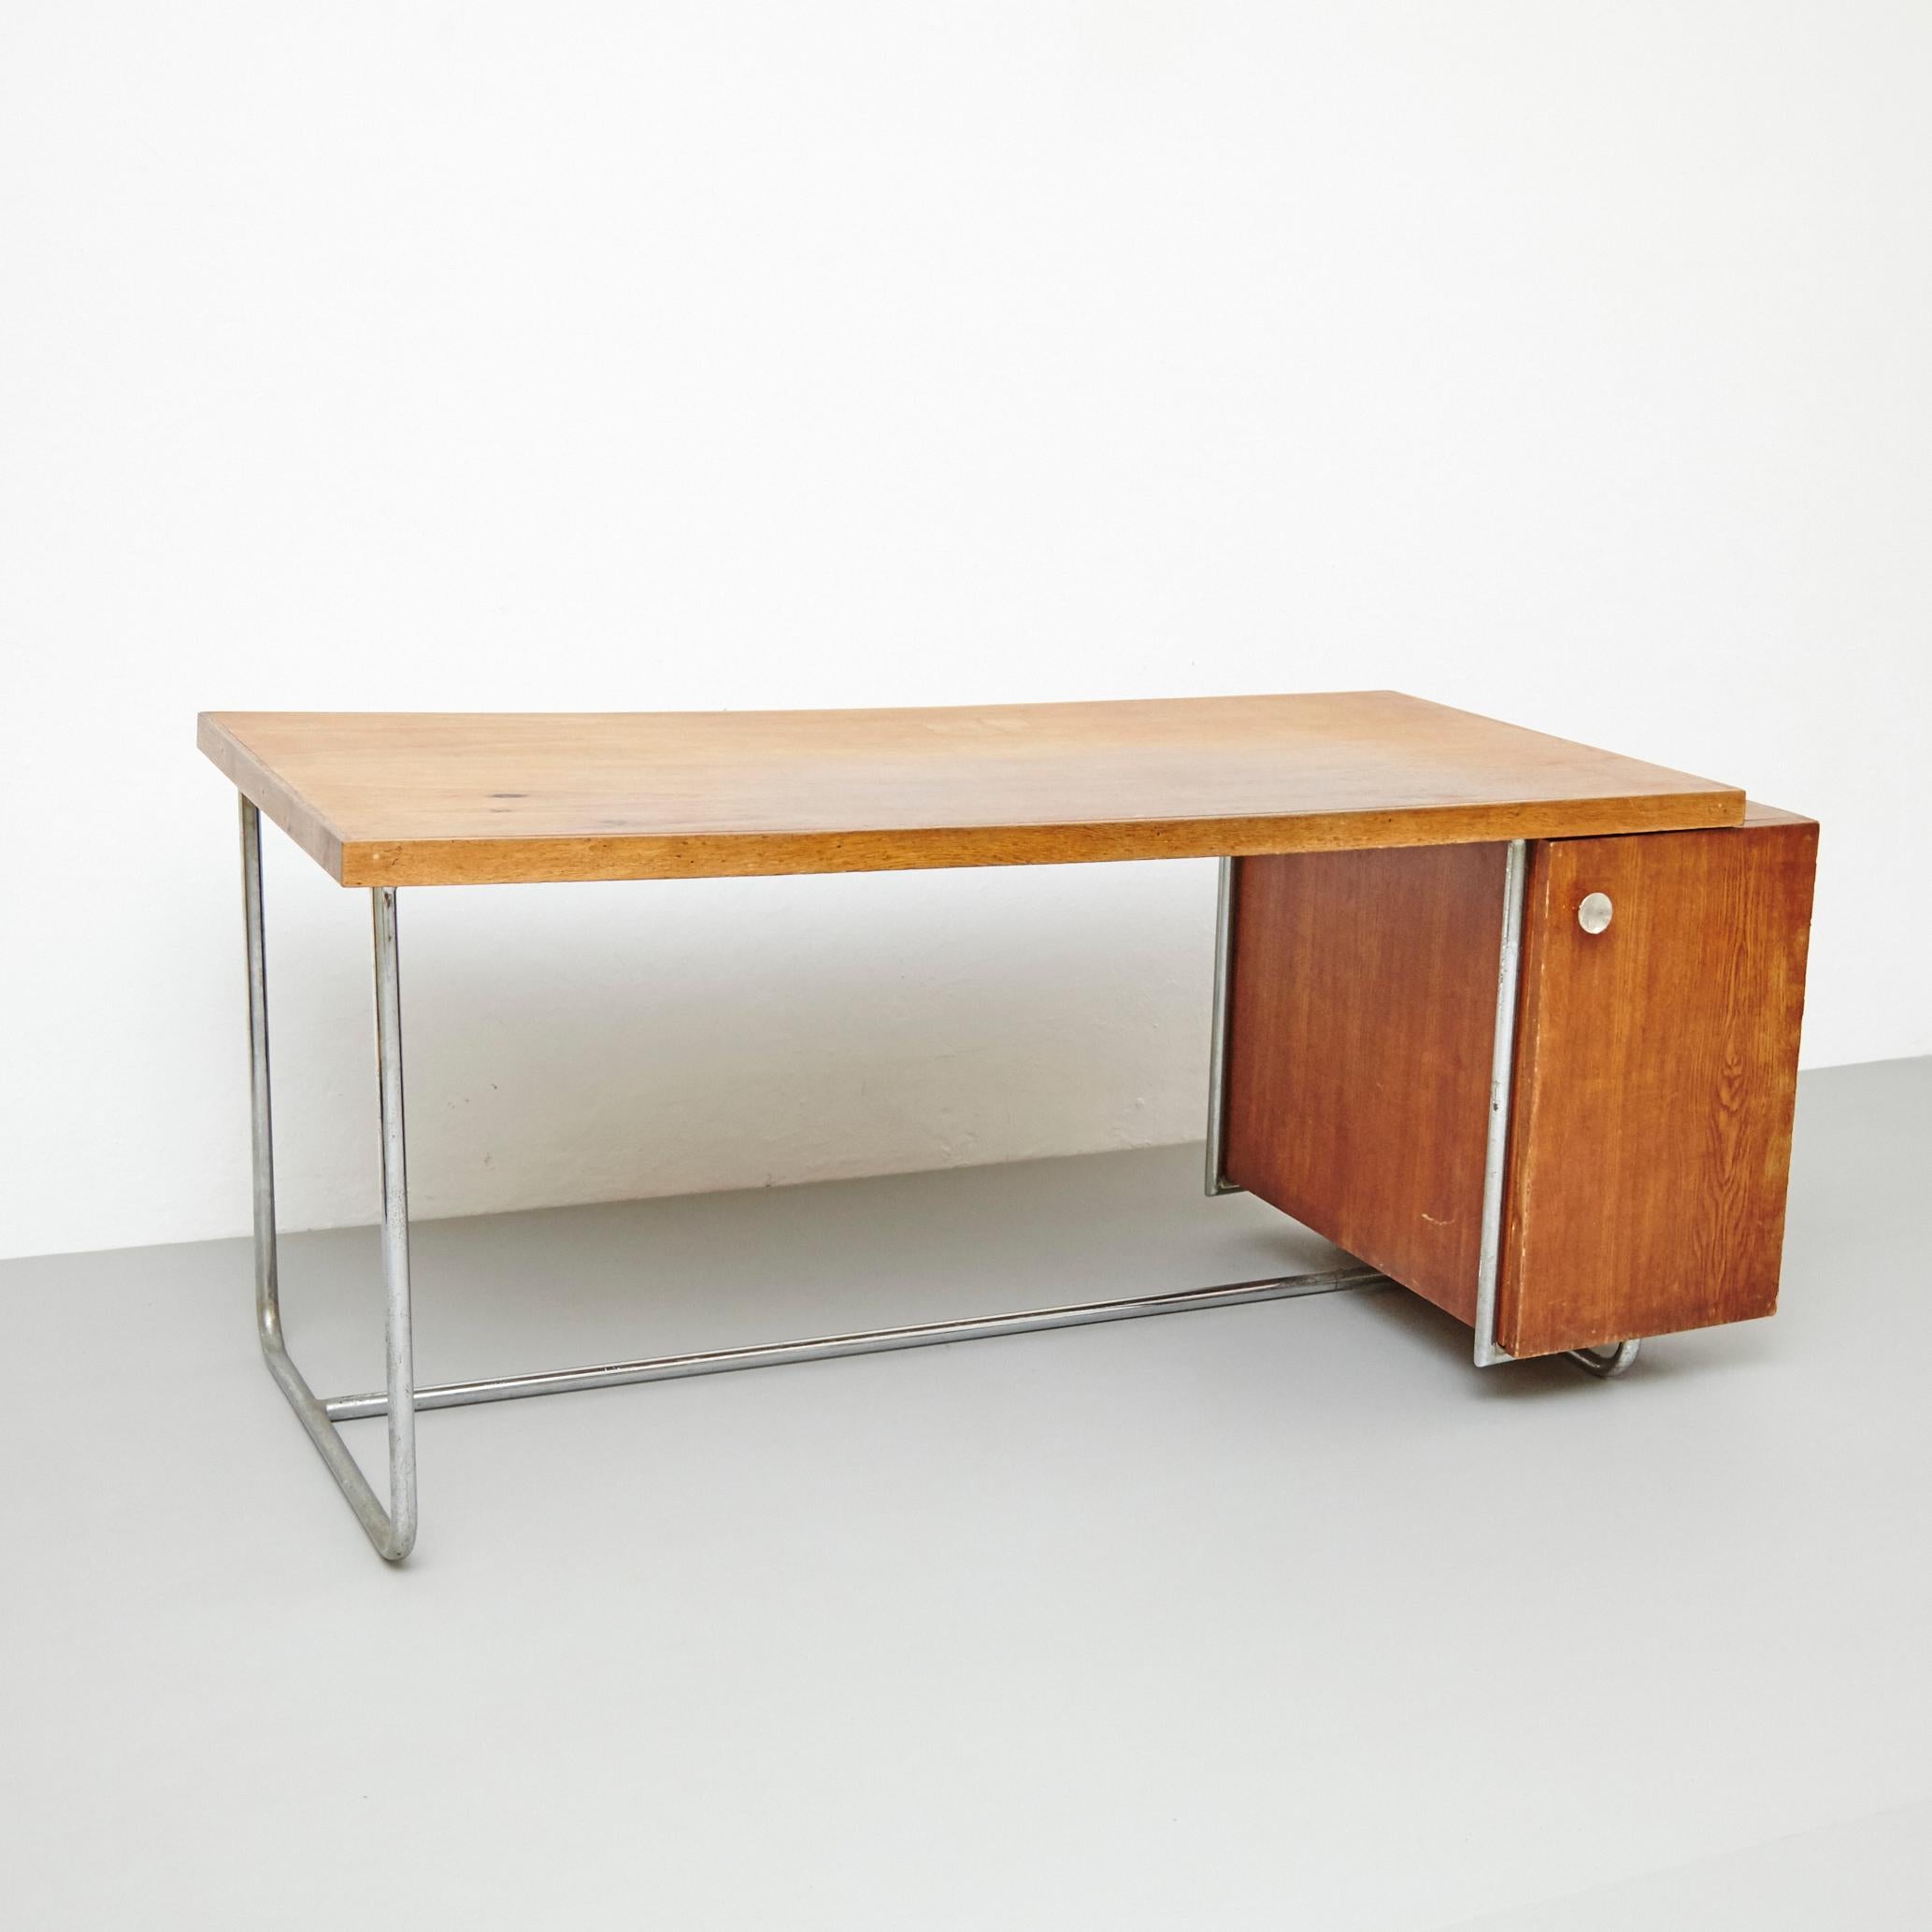 Bauhaus desk designed by unknown designer, circa 1930.
Manufactured in Netherlands.
Tubular structure, wood.

This desk is made of a metal tubular structure and wood, all manufactured in Holland, circa 1930s. It is in good original condition,